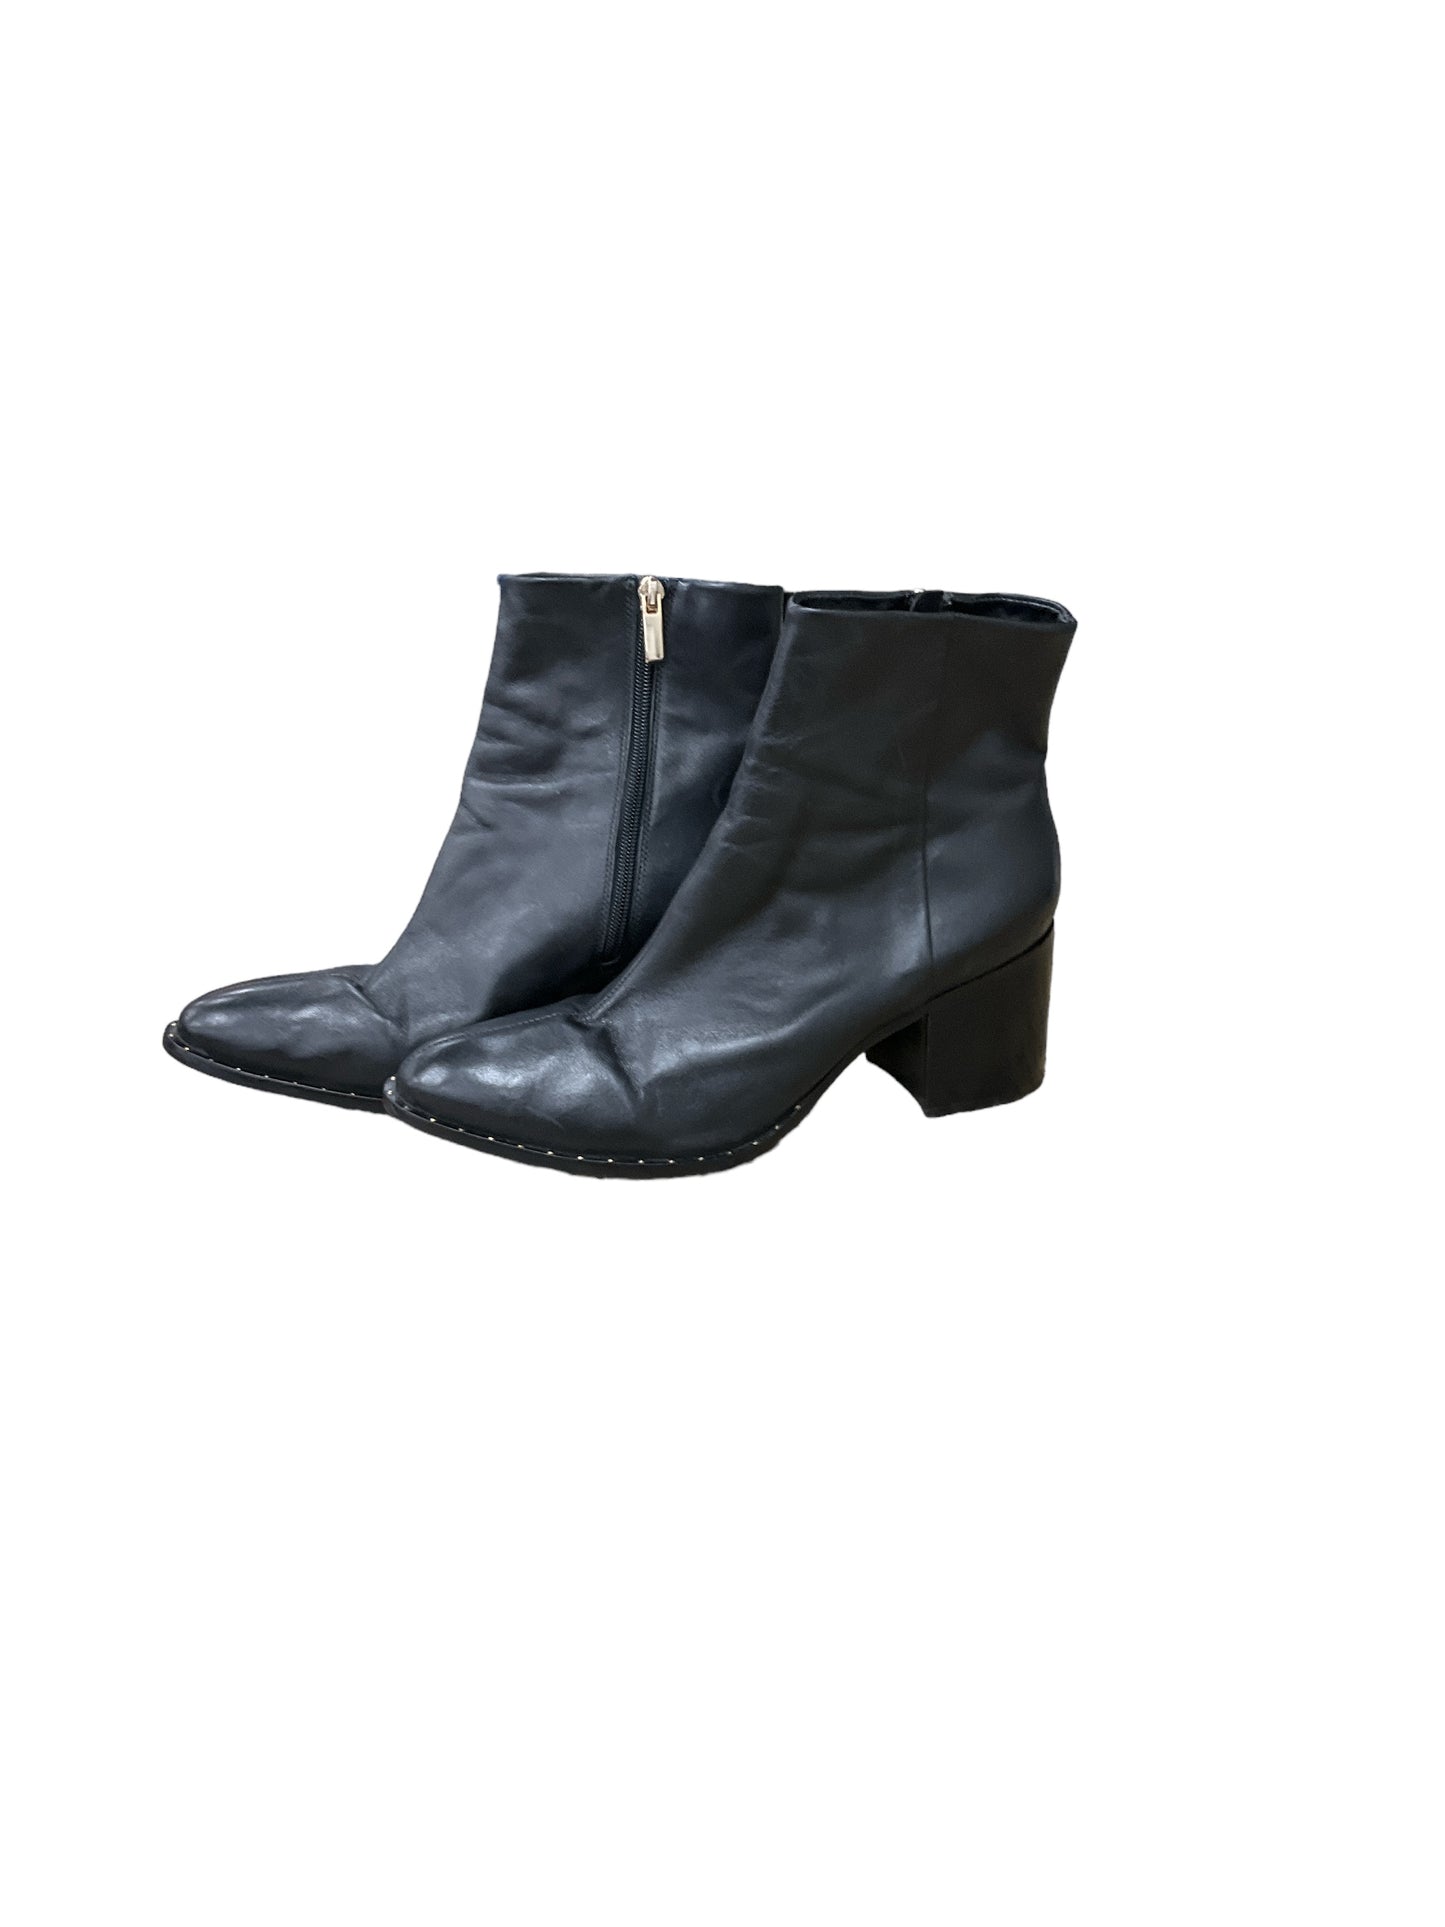 Boots Ankle Heels By Cmb  Size: 11